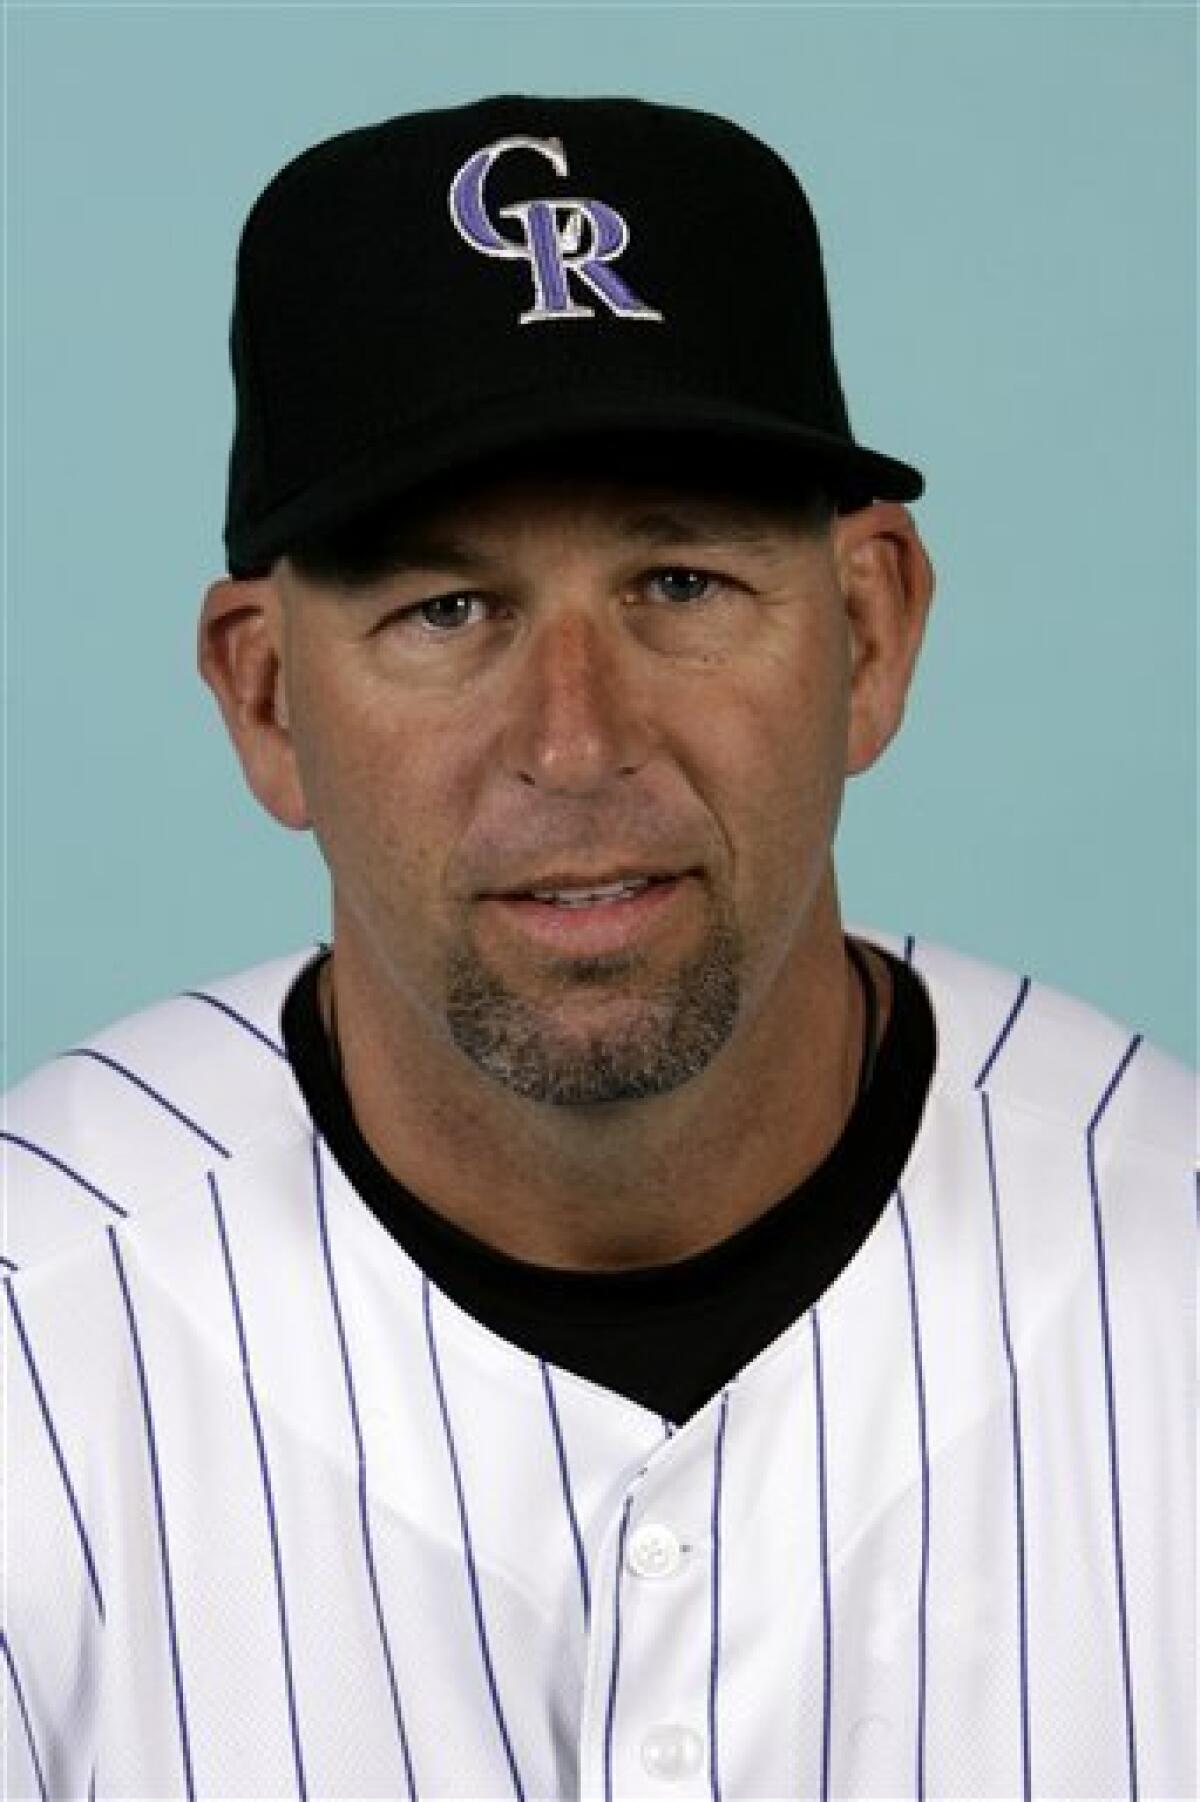 Walt Weiss hired as Colorado Rockies manager - The San Diego Union